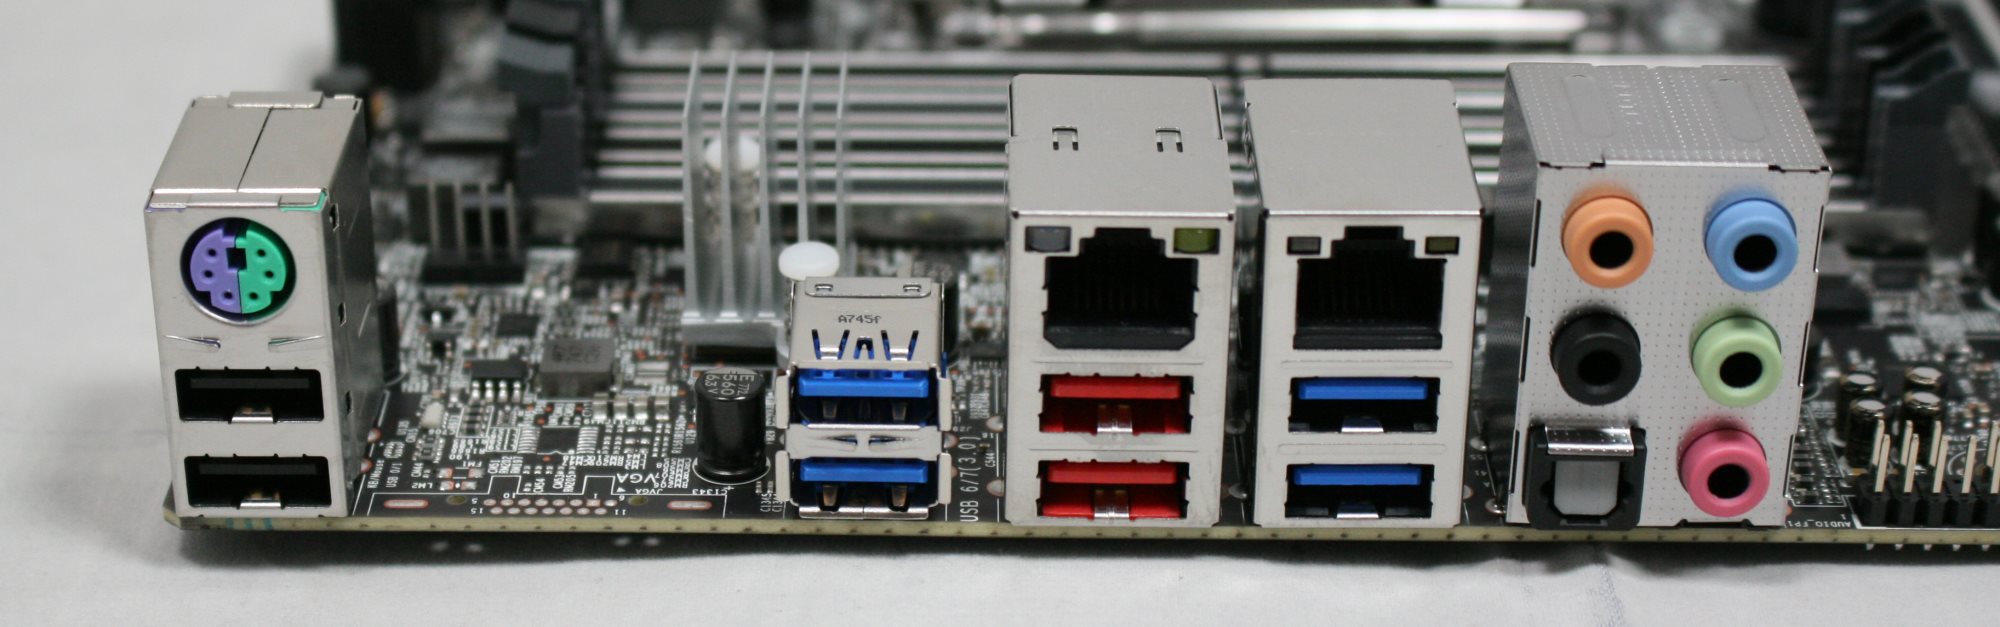 The Supermicro X11SRA Motherboard Review: C422 based Workstation